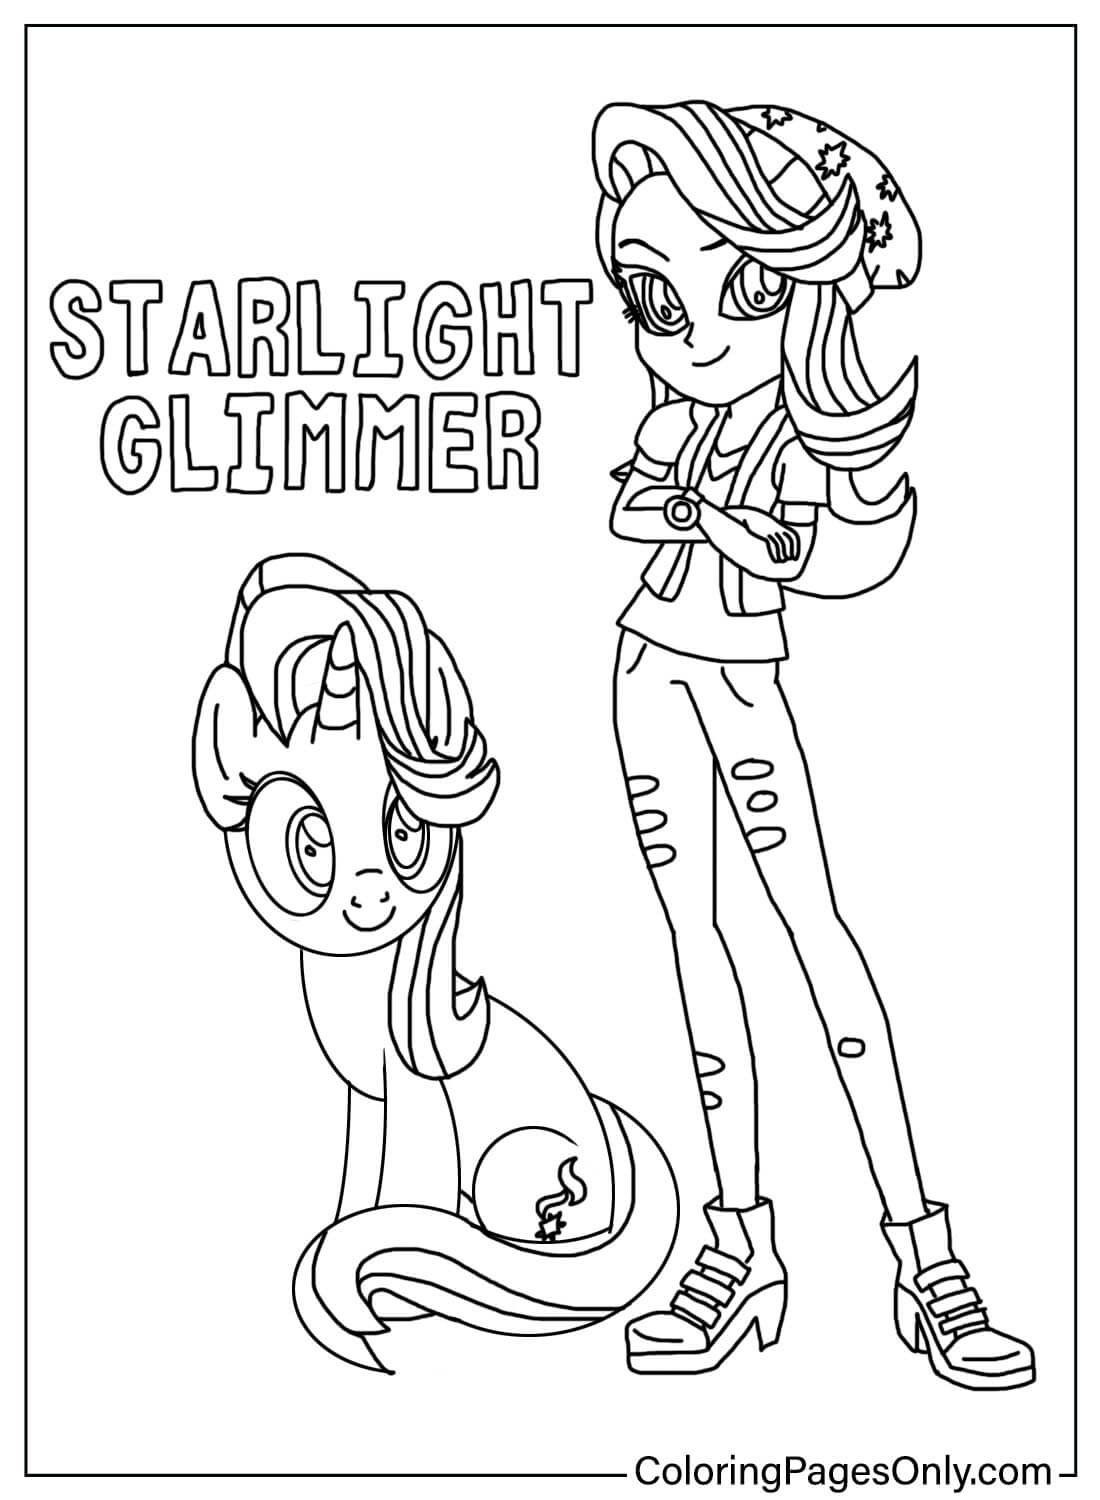 Starlight Glimmer Human and Pony Coloring Page from Starlight Glimmer